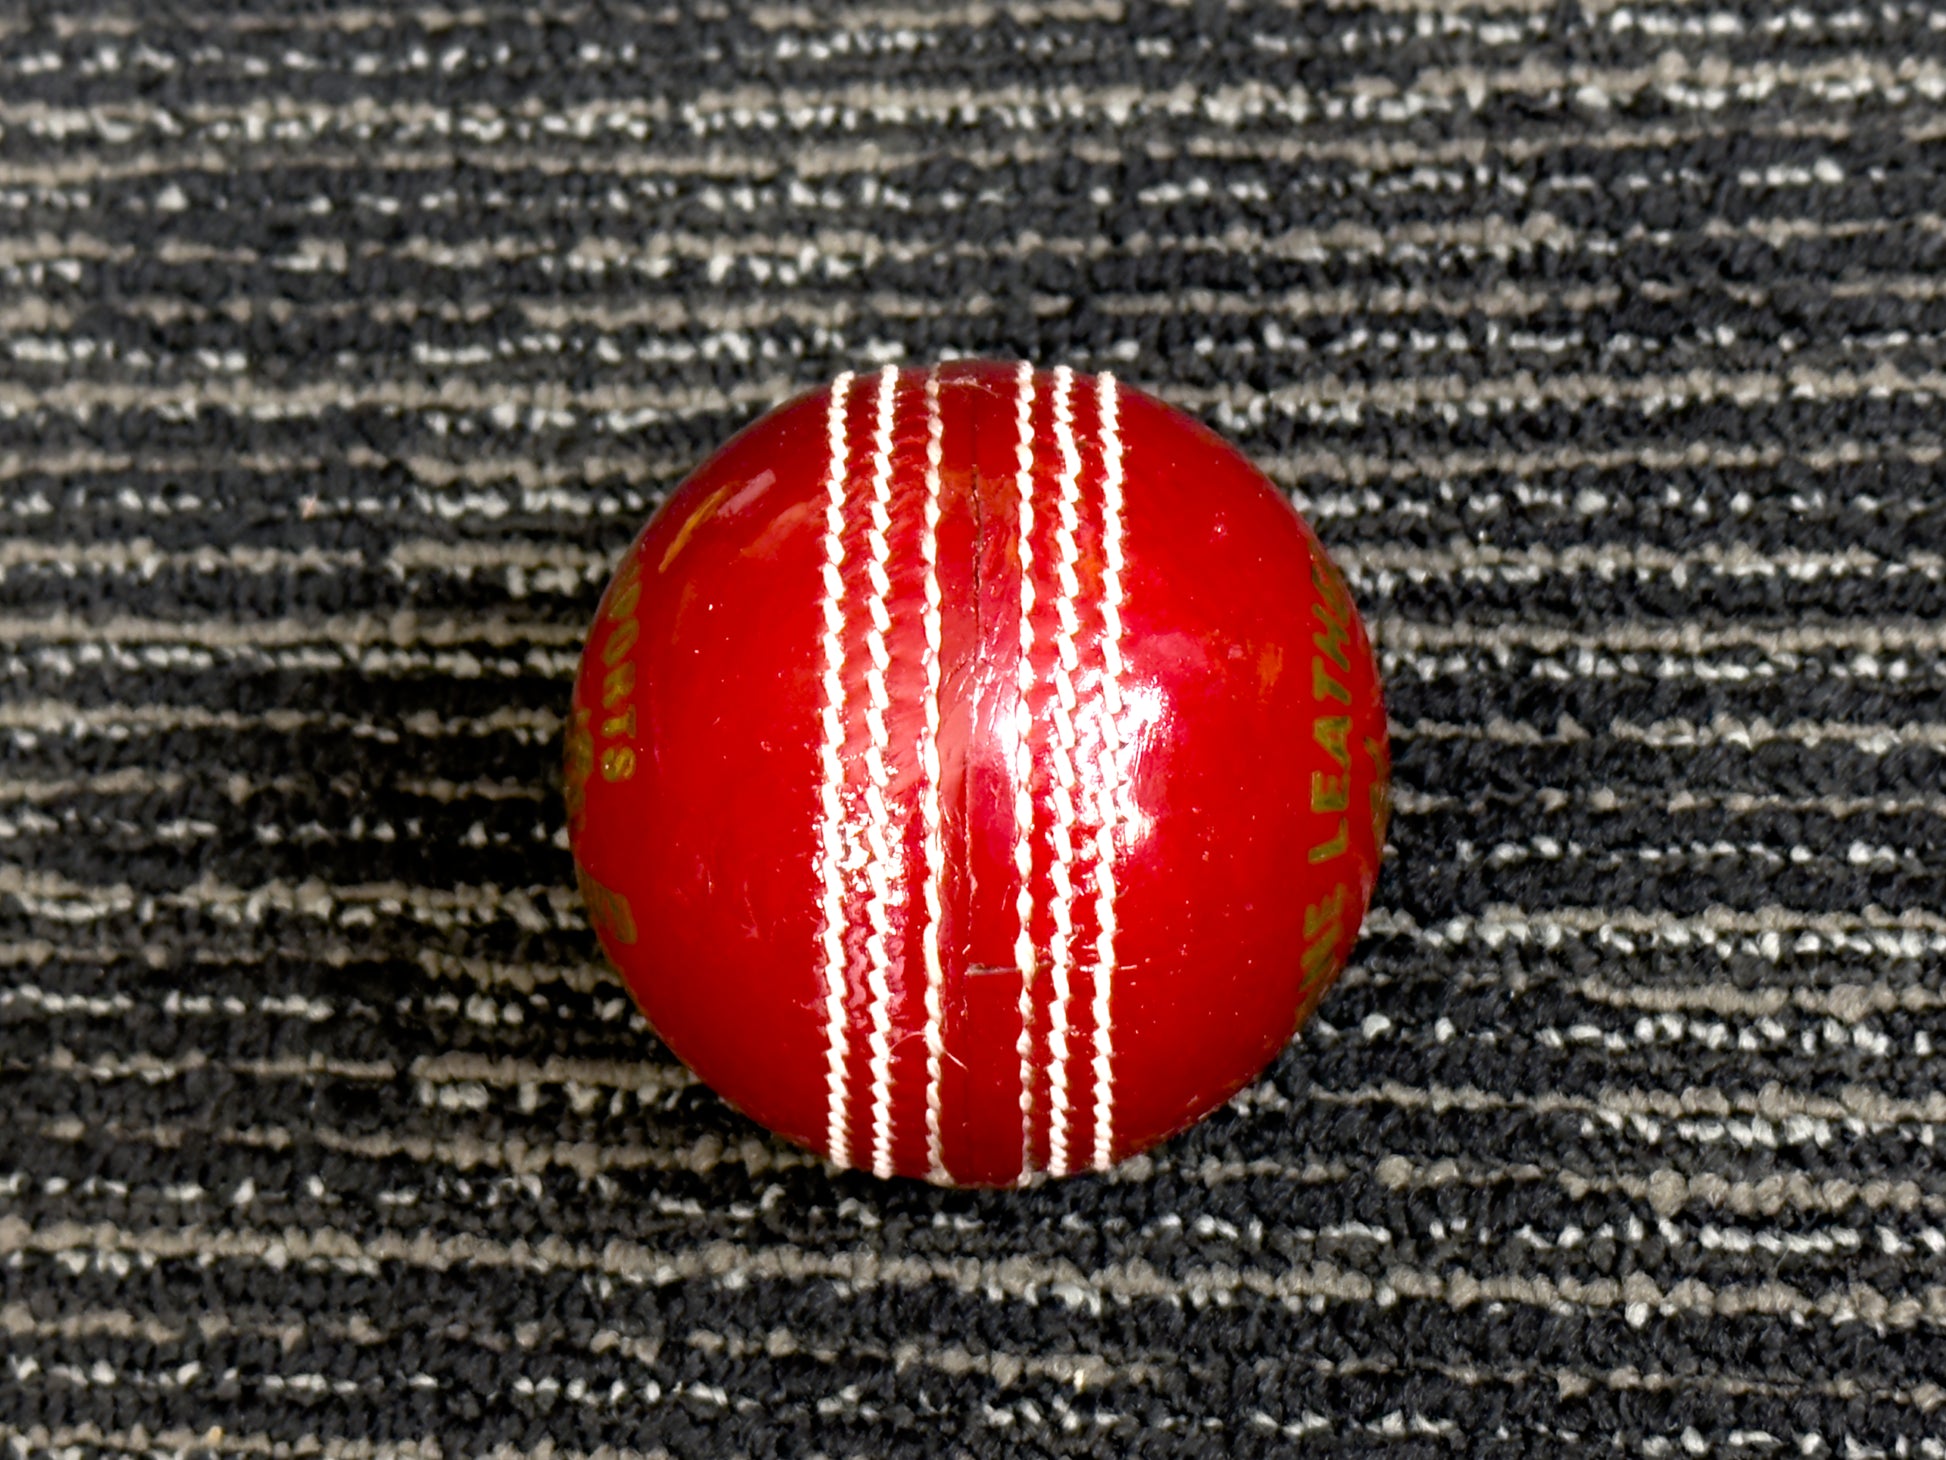 Black Ash Royal Crown pack of 6 white cricket leather balls, premium quality, 156 grams each, 4PC genuine leather, excellent shape retention, suitable for 35 to 40 overs cricket, machine-stitched according to MCC regulations.